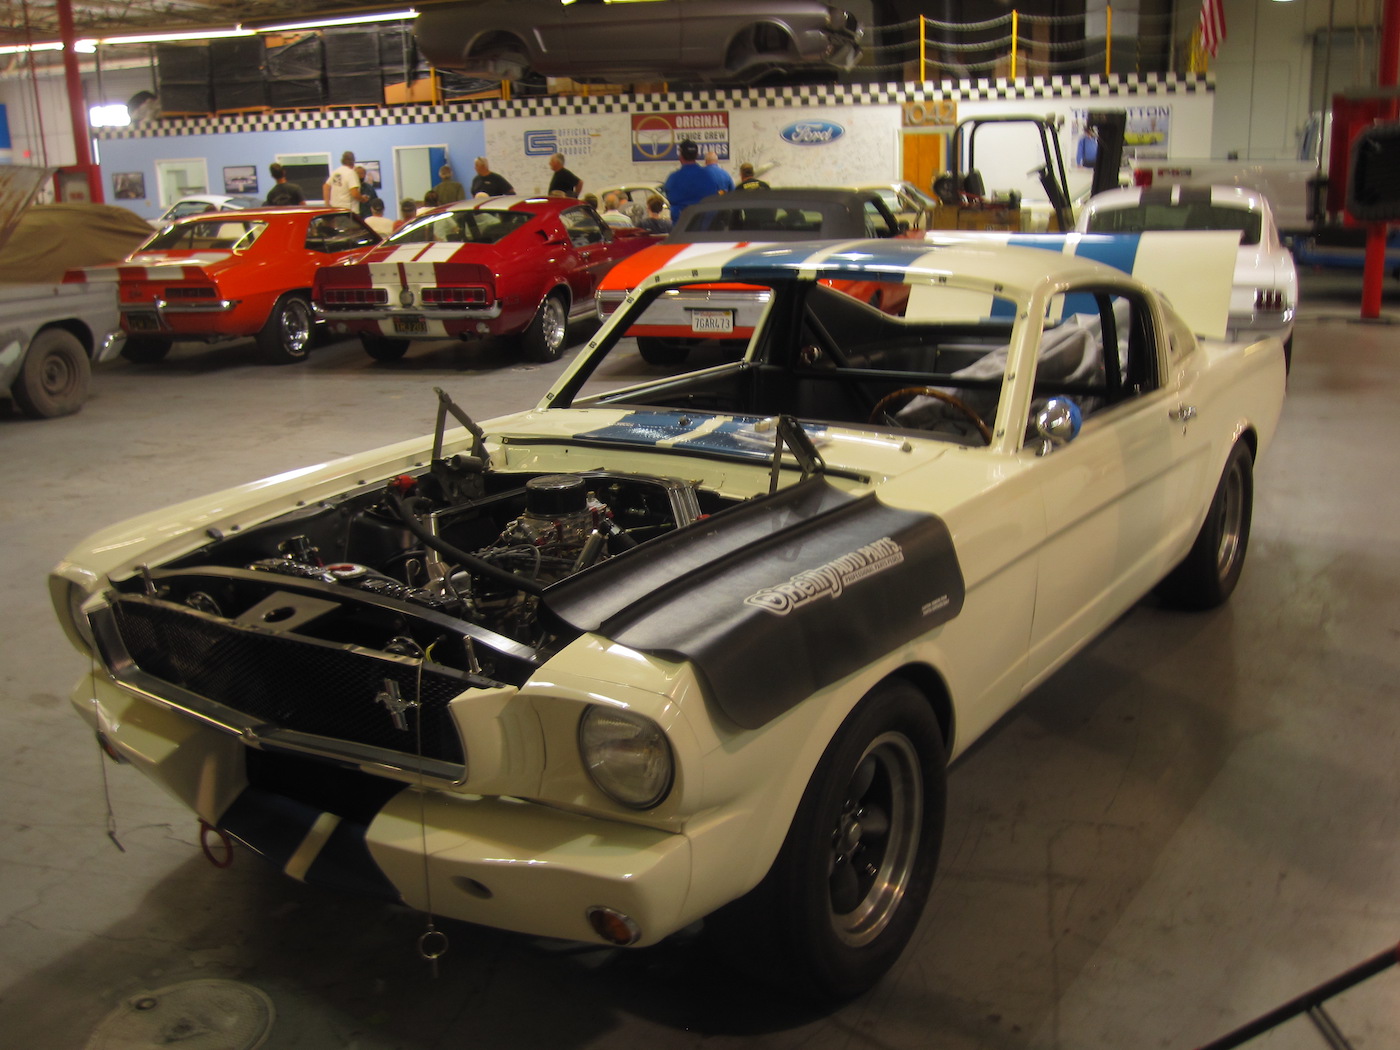 Shelby Mustang: We Go Back In Time (Last Saturday) and Visit the Shelby GT350 Shop